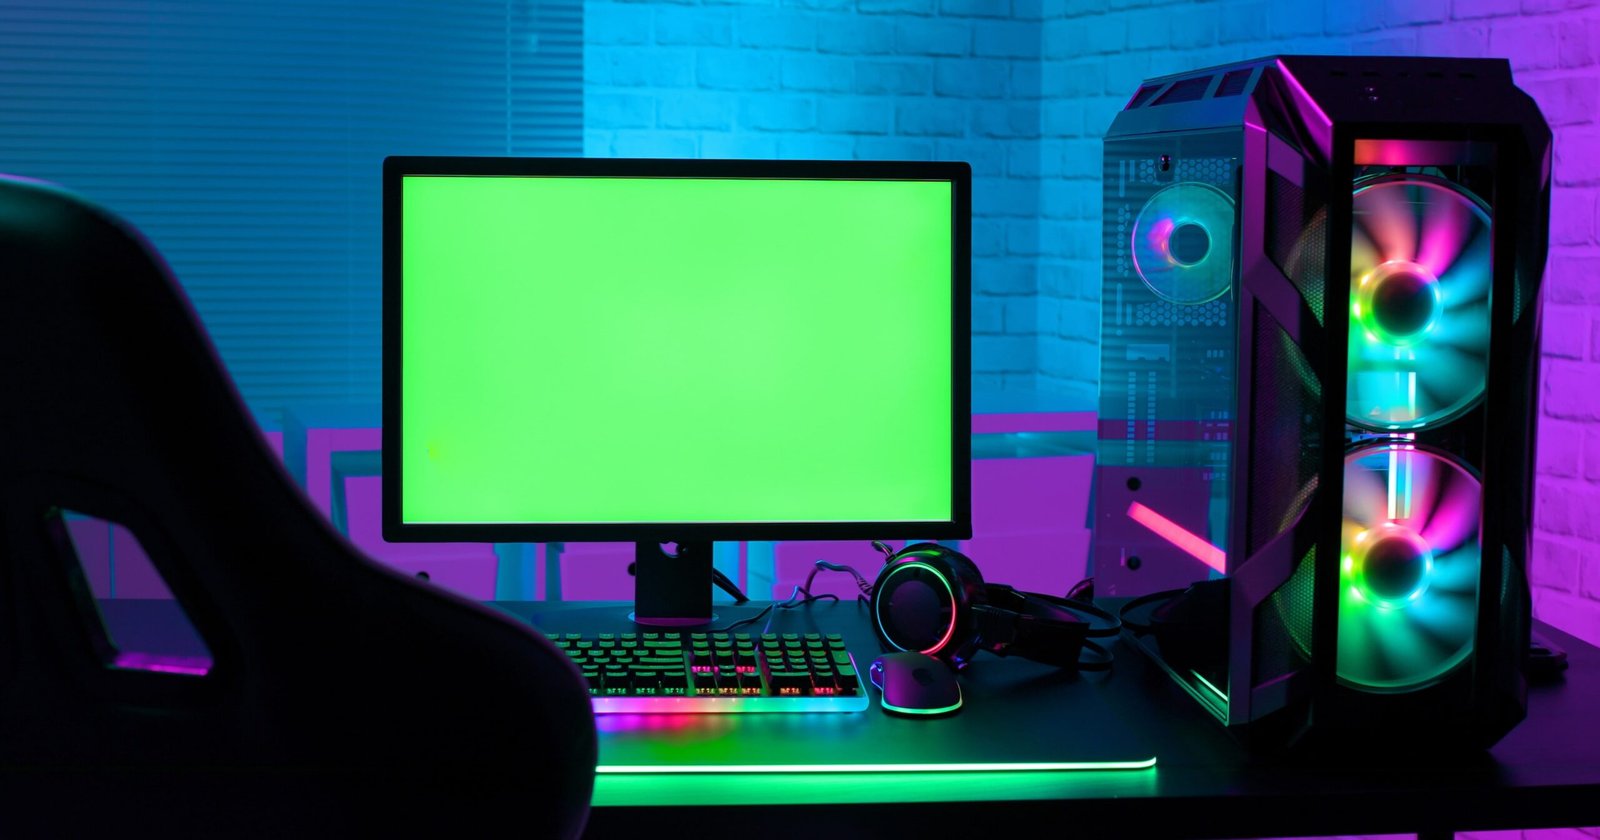 What Does RGB Stand For in Gaming?